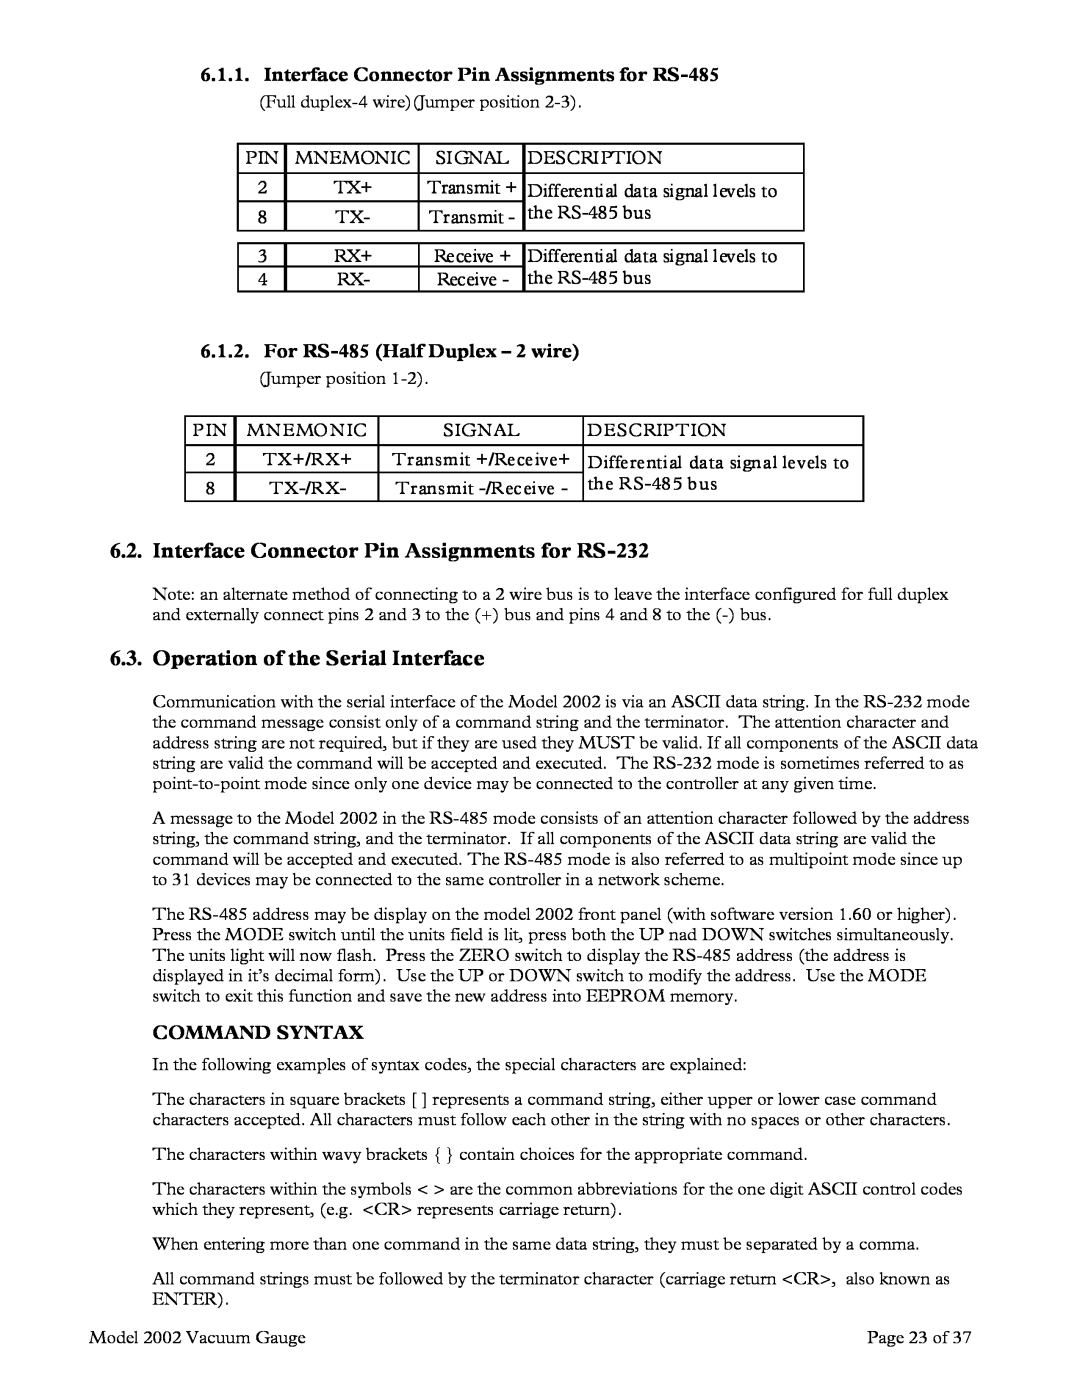 Teledyne 2002 instruction manual Operation of the Serial Interface, For RS-485Half Duplex - 2 wire, Command Syntax 